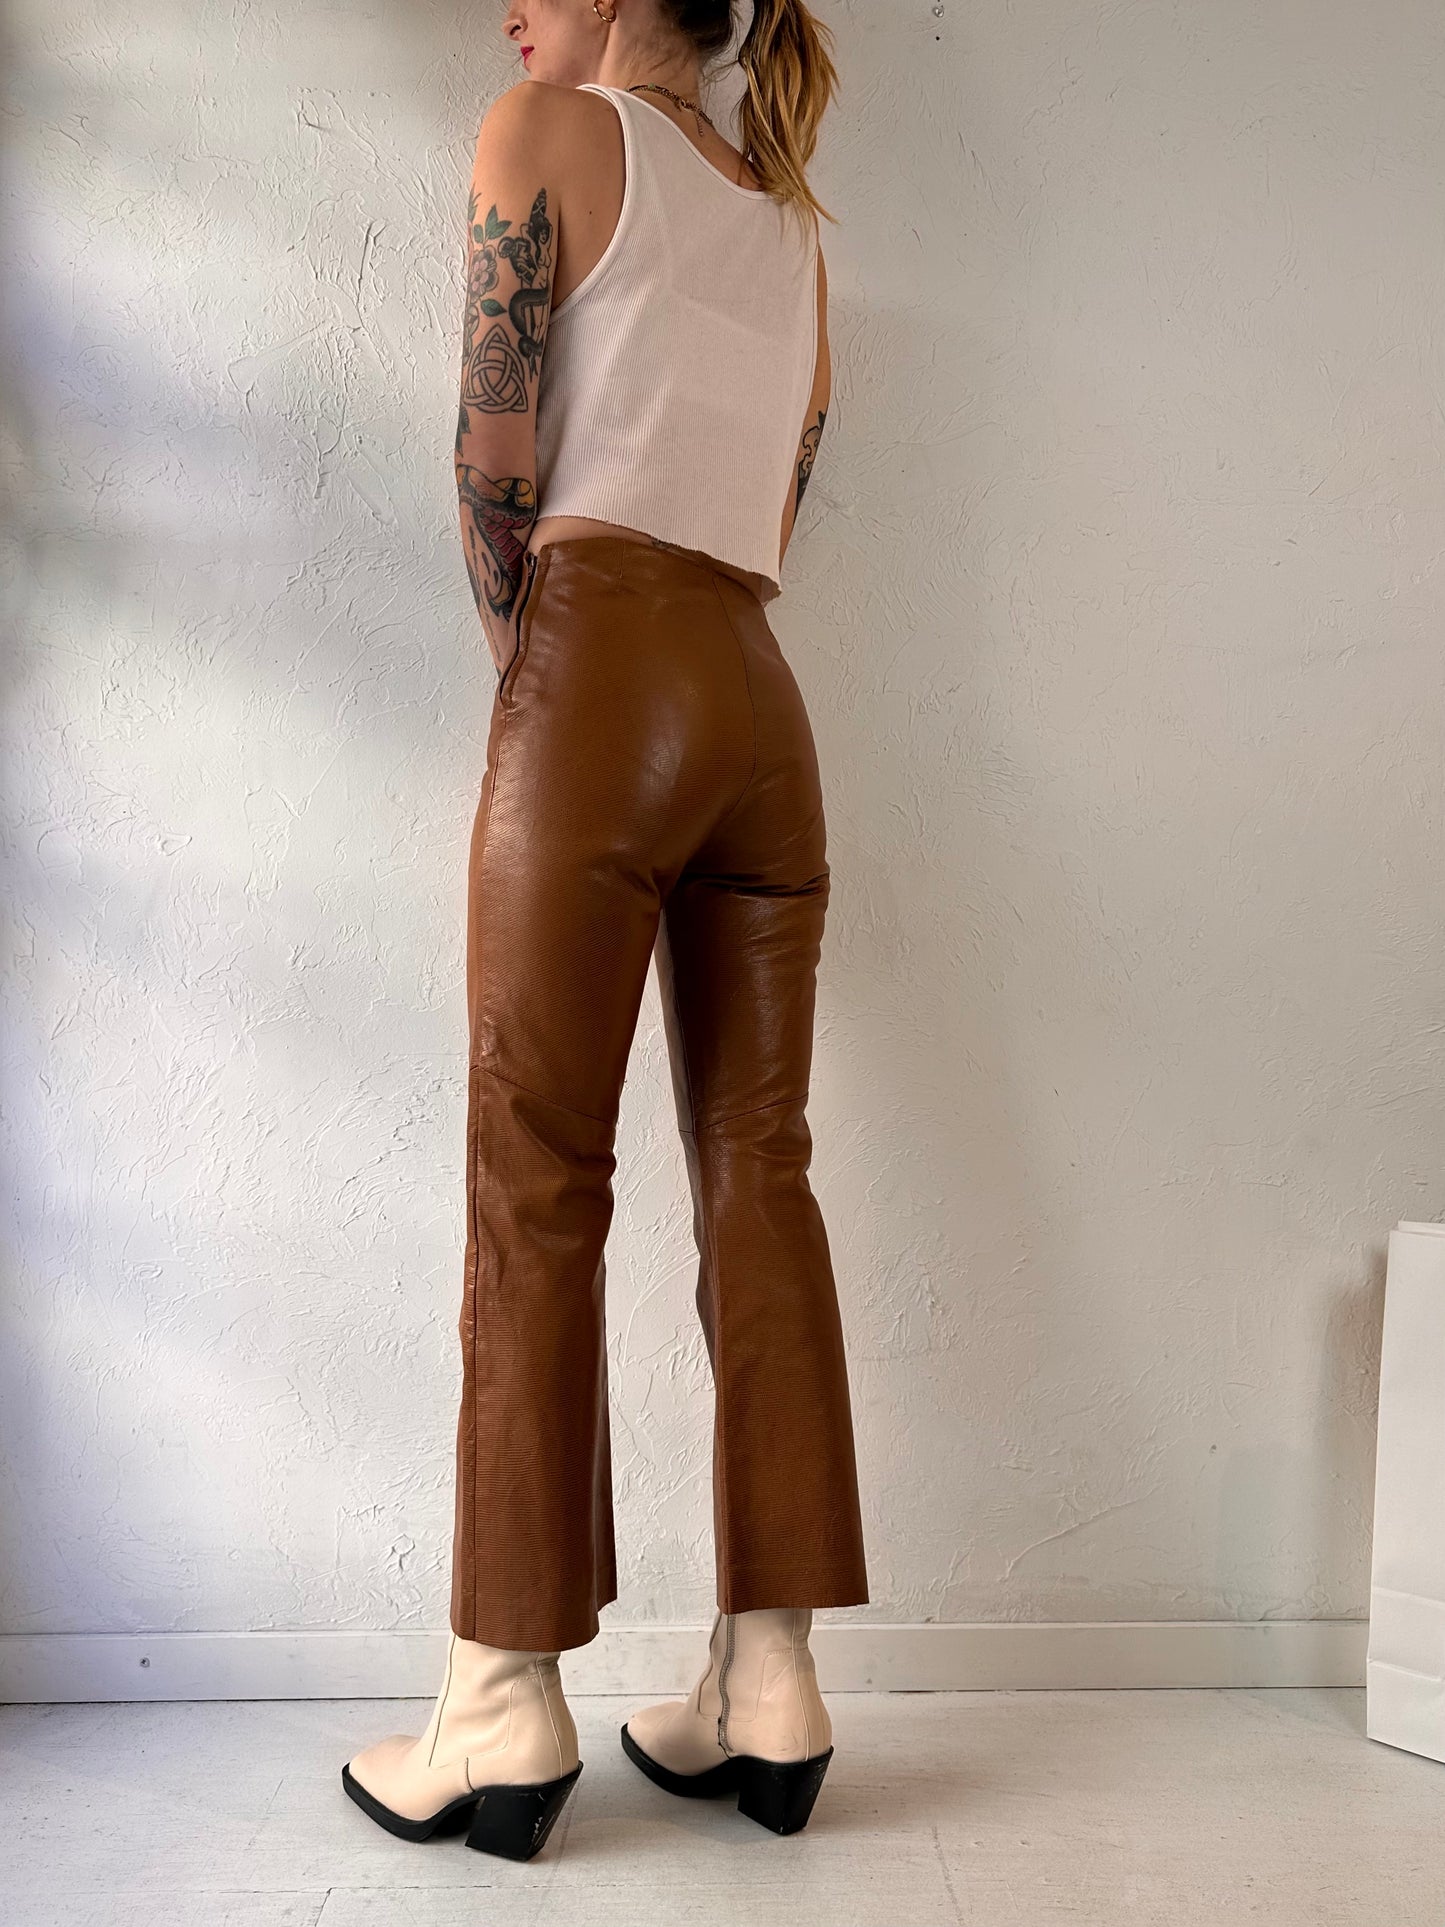 90s 'Danier' Brown Leather Pants / Small